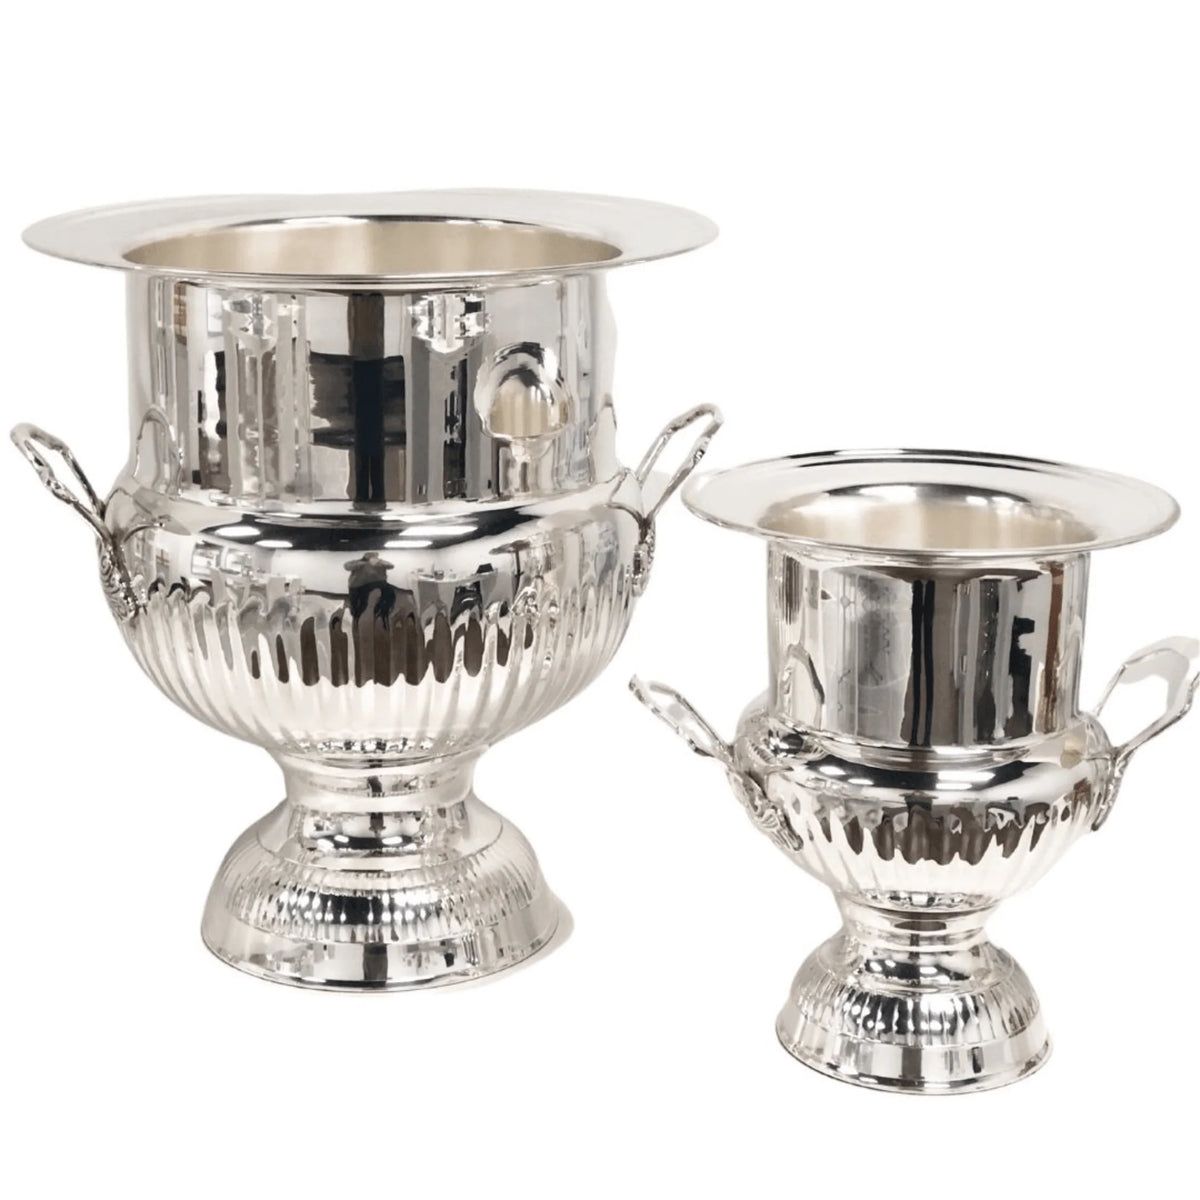 Silver Champagne Bucket - Available in 2 Sizes | The Well Appointed House, LLC